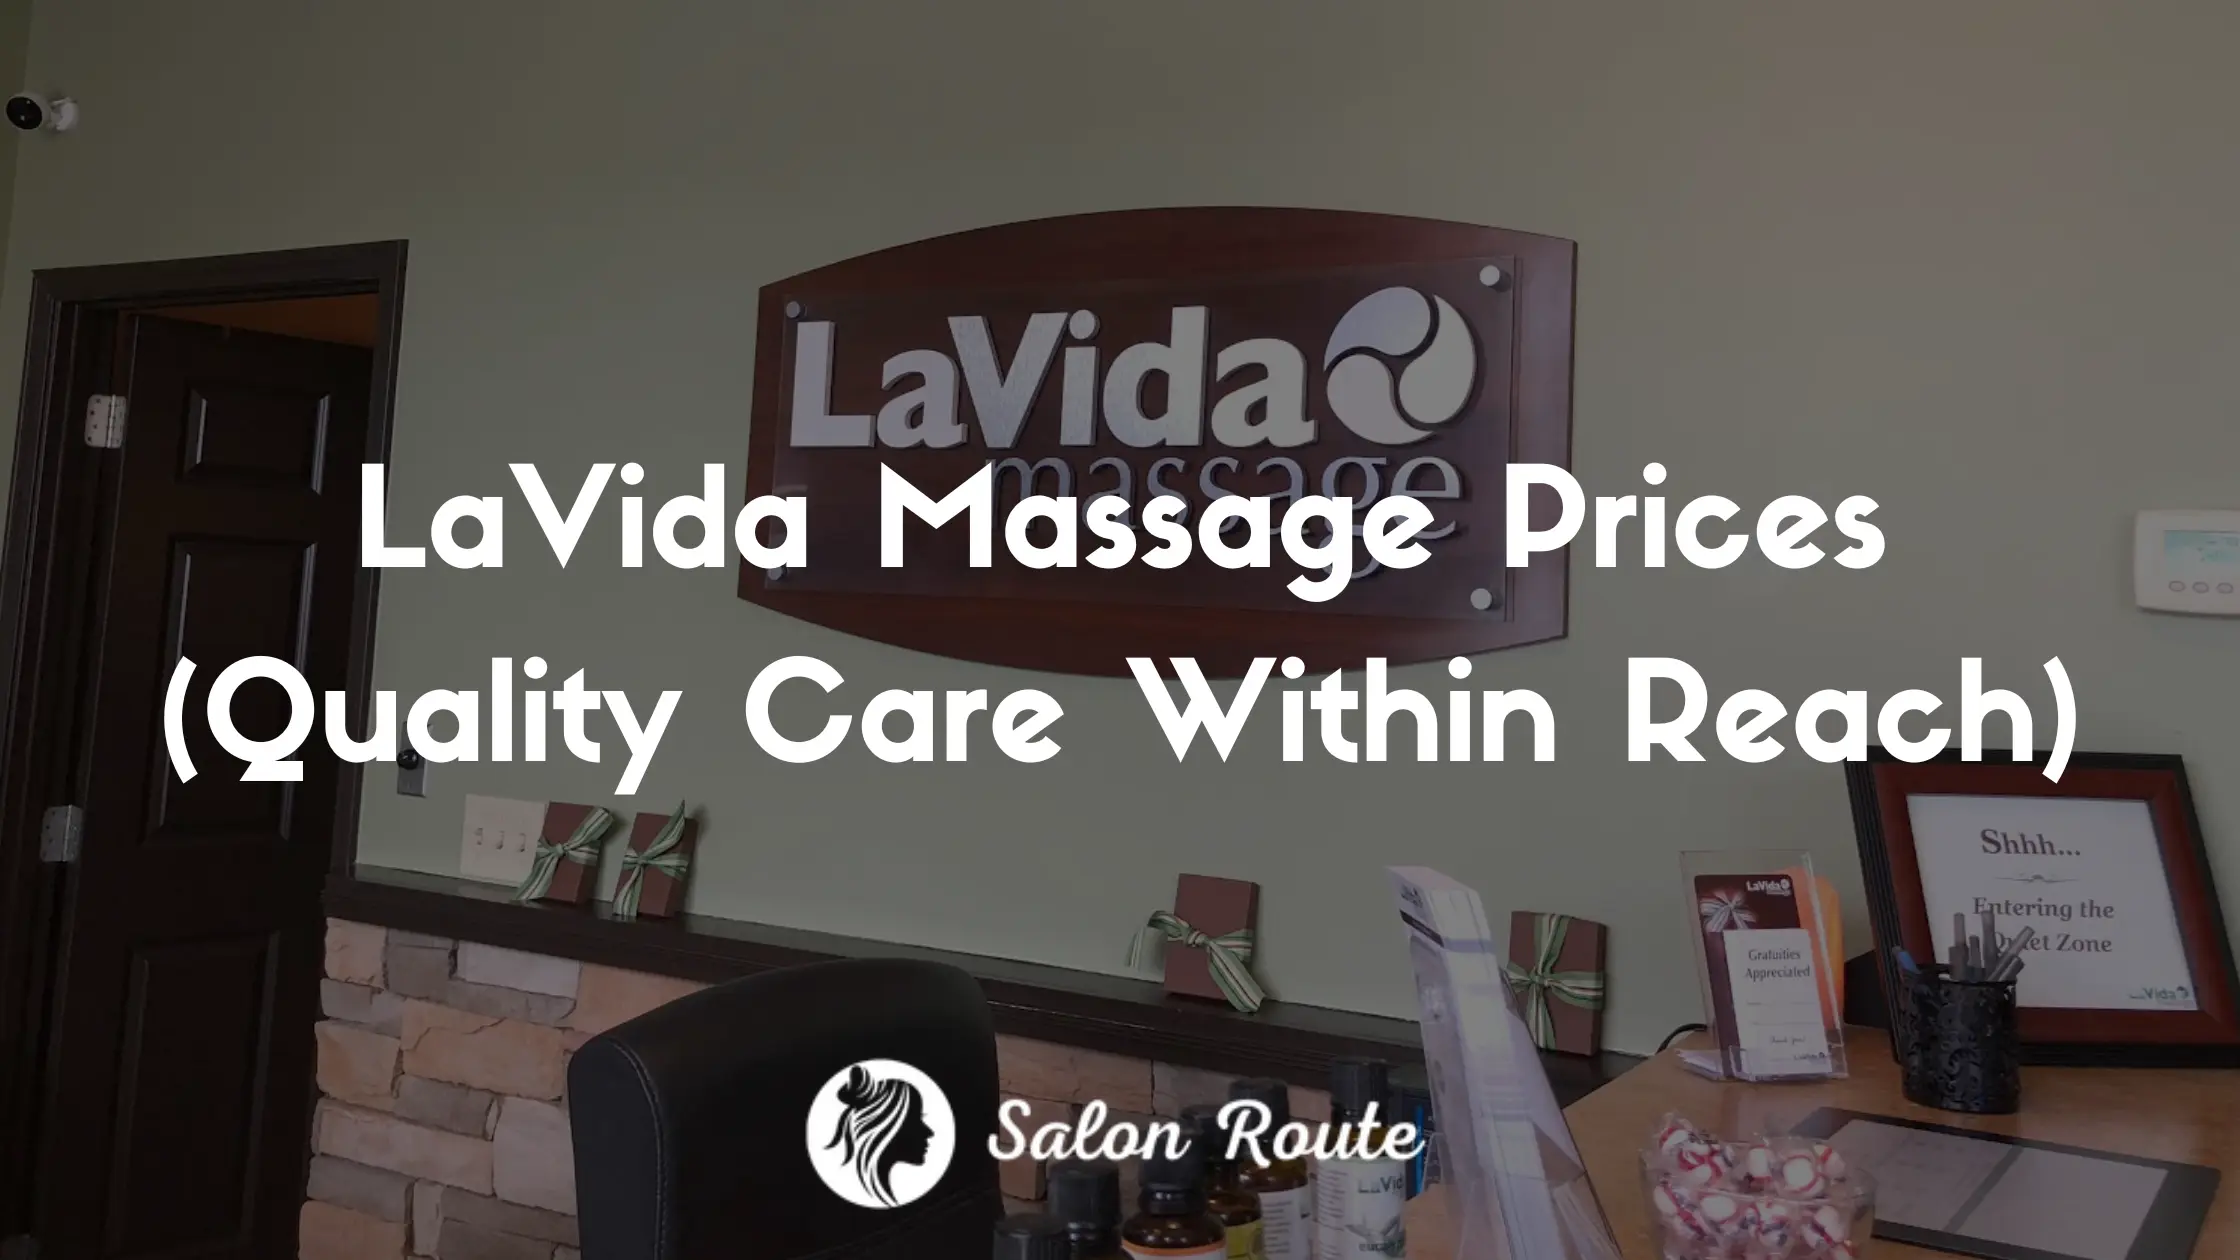 LaVida Massage Prices (Quality Care Within Reach)